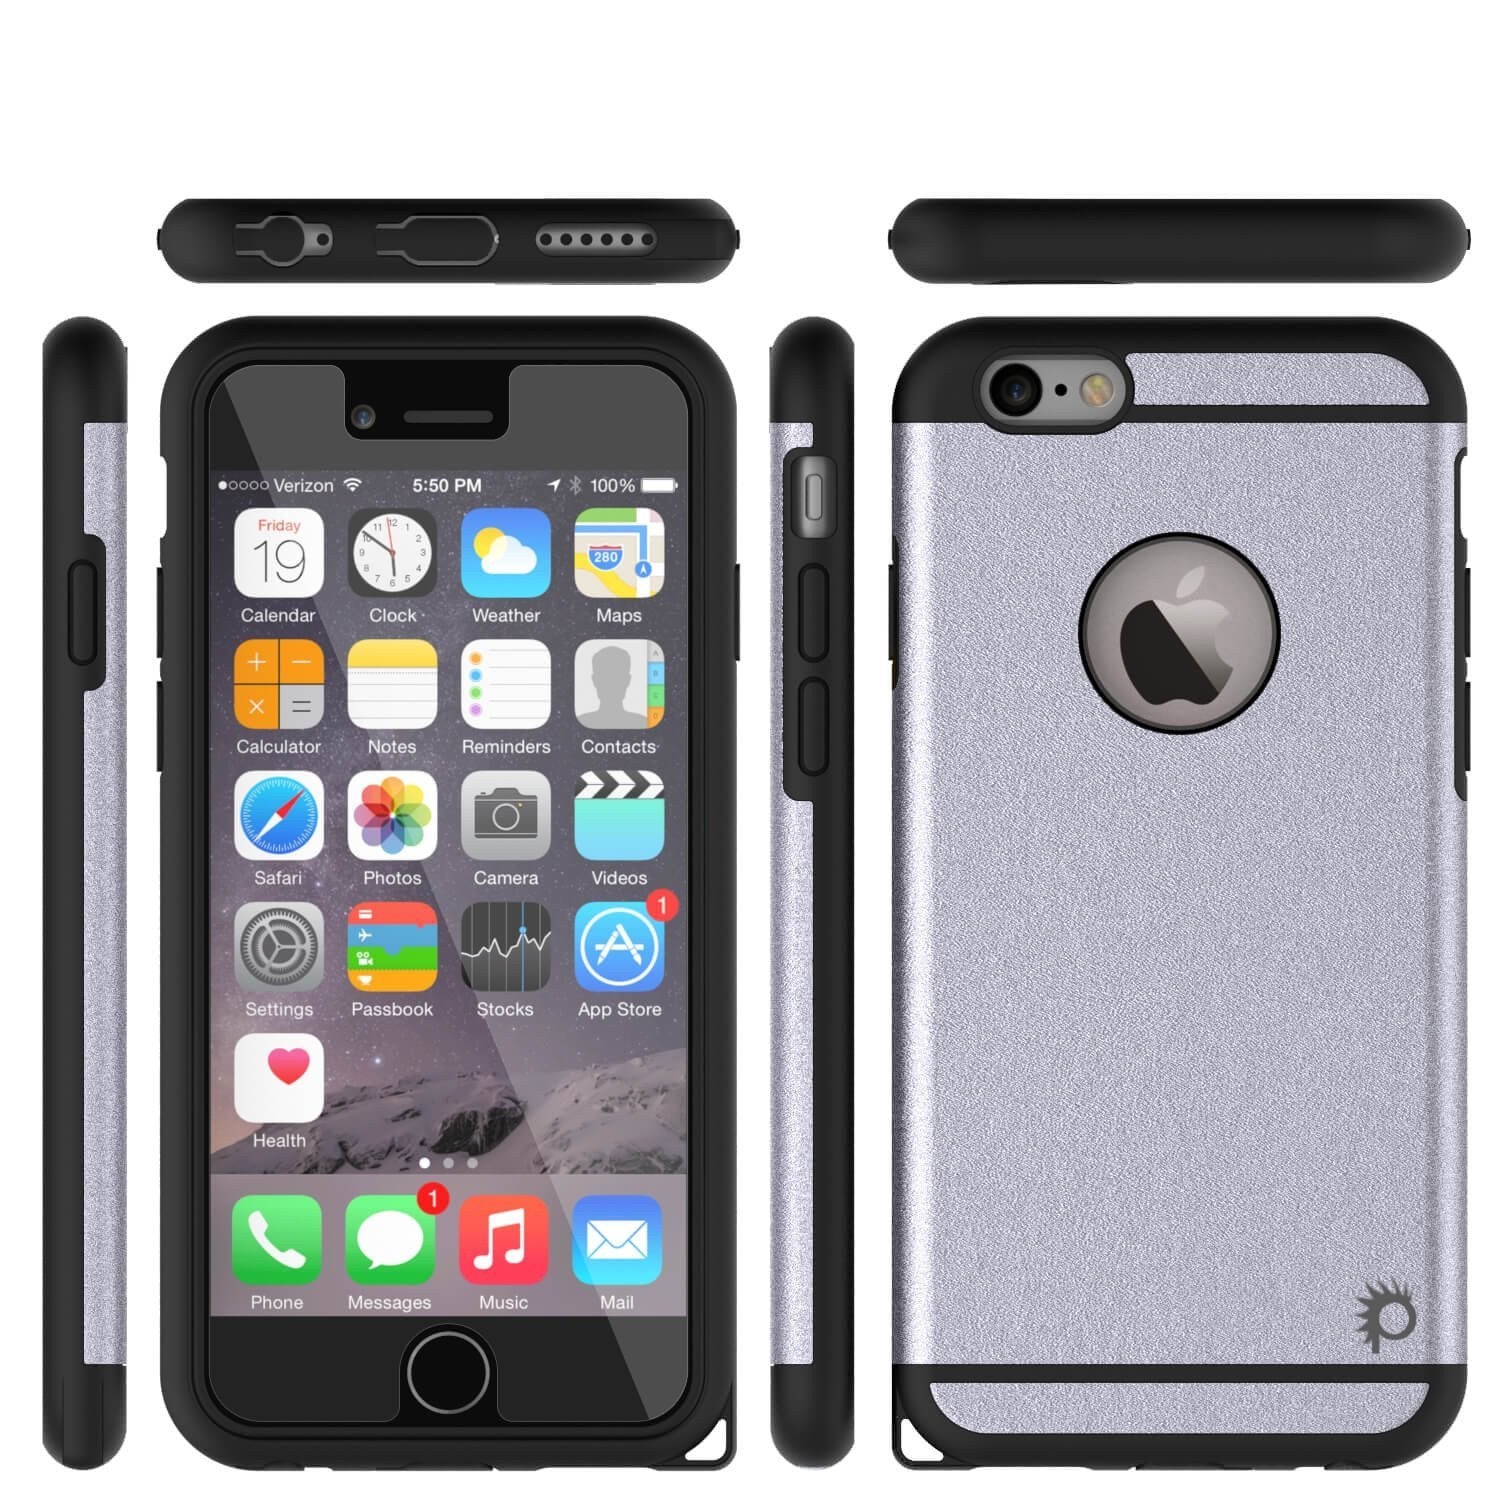 iPhone 5s/5/SE Case PunkCase Galactic SIlver Series Slim w/ Tempered Glass | Lifetime Warranty